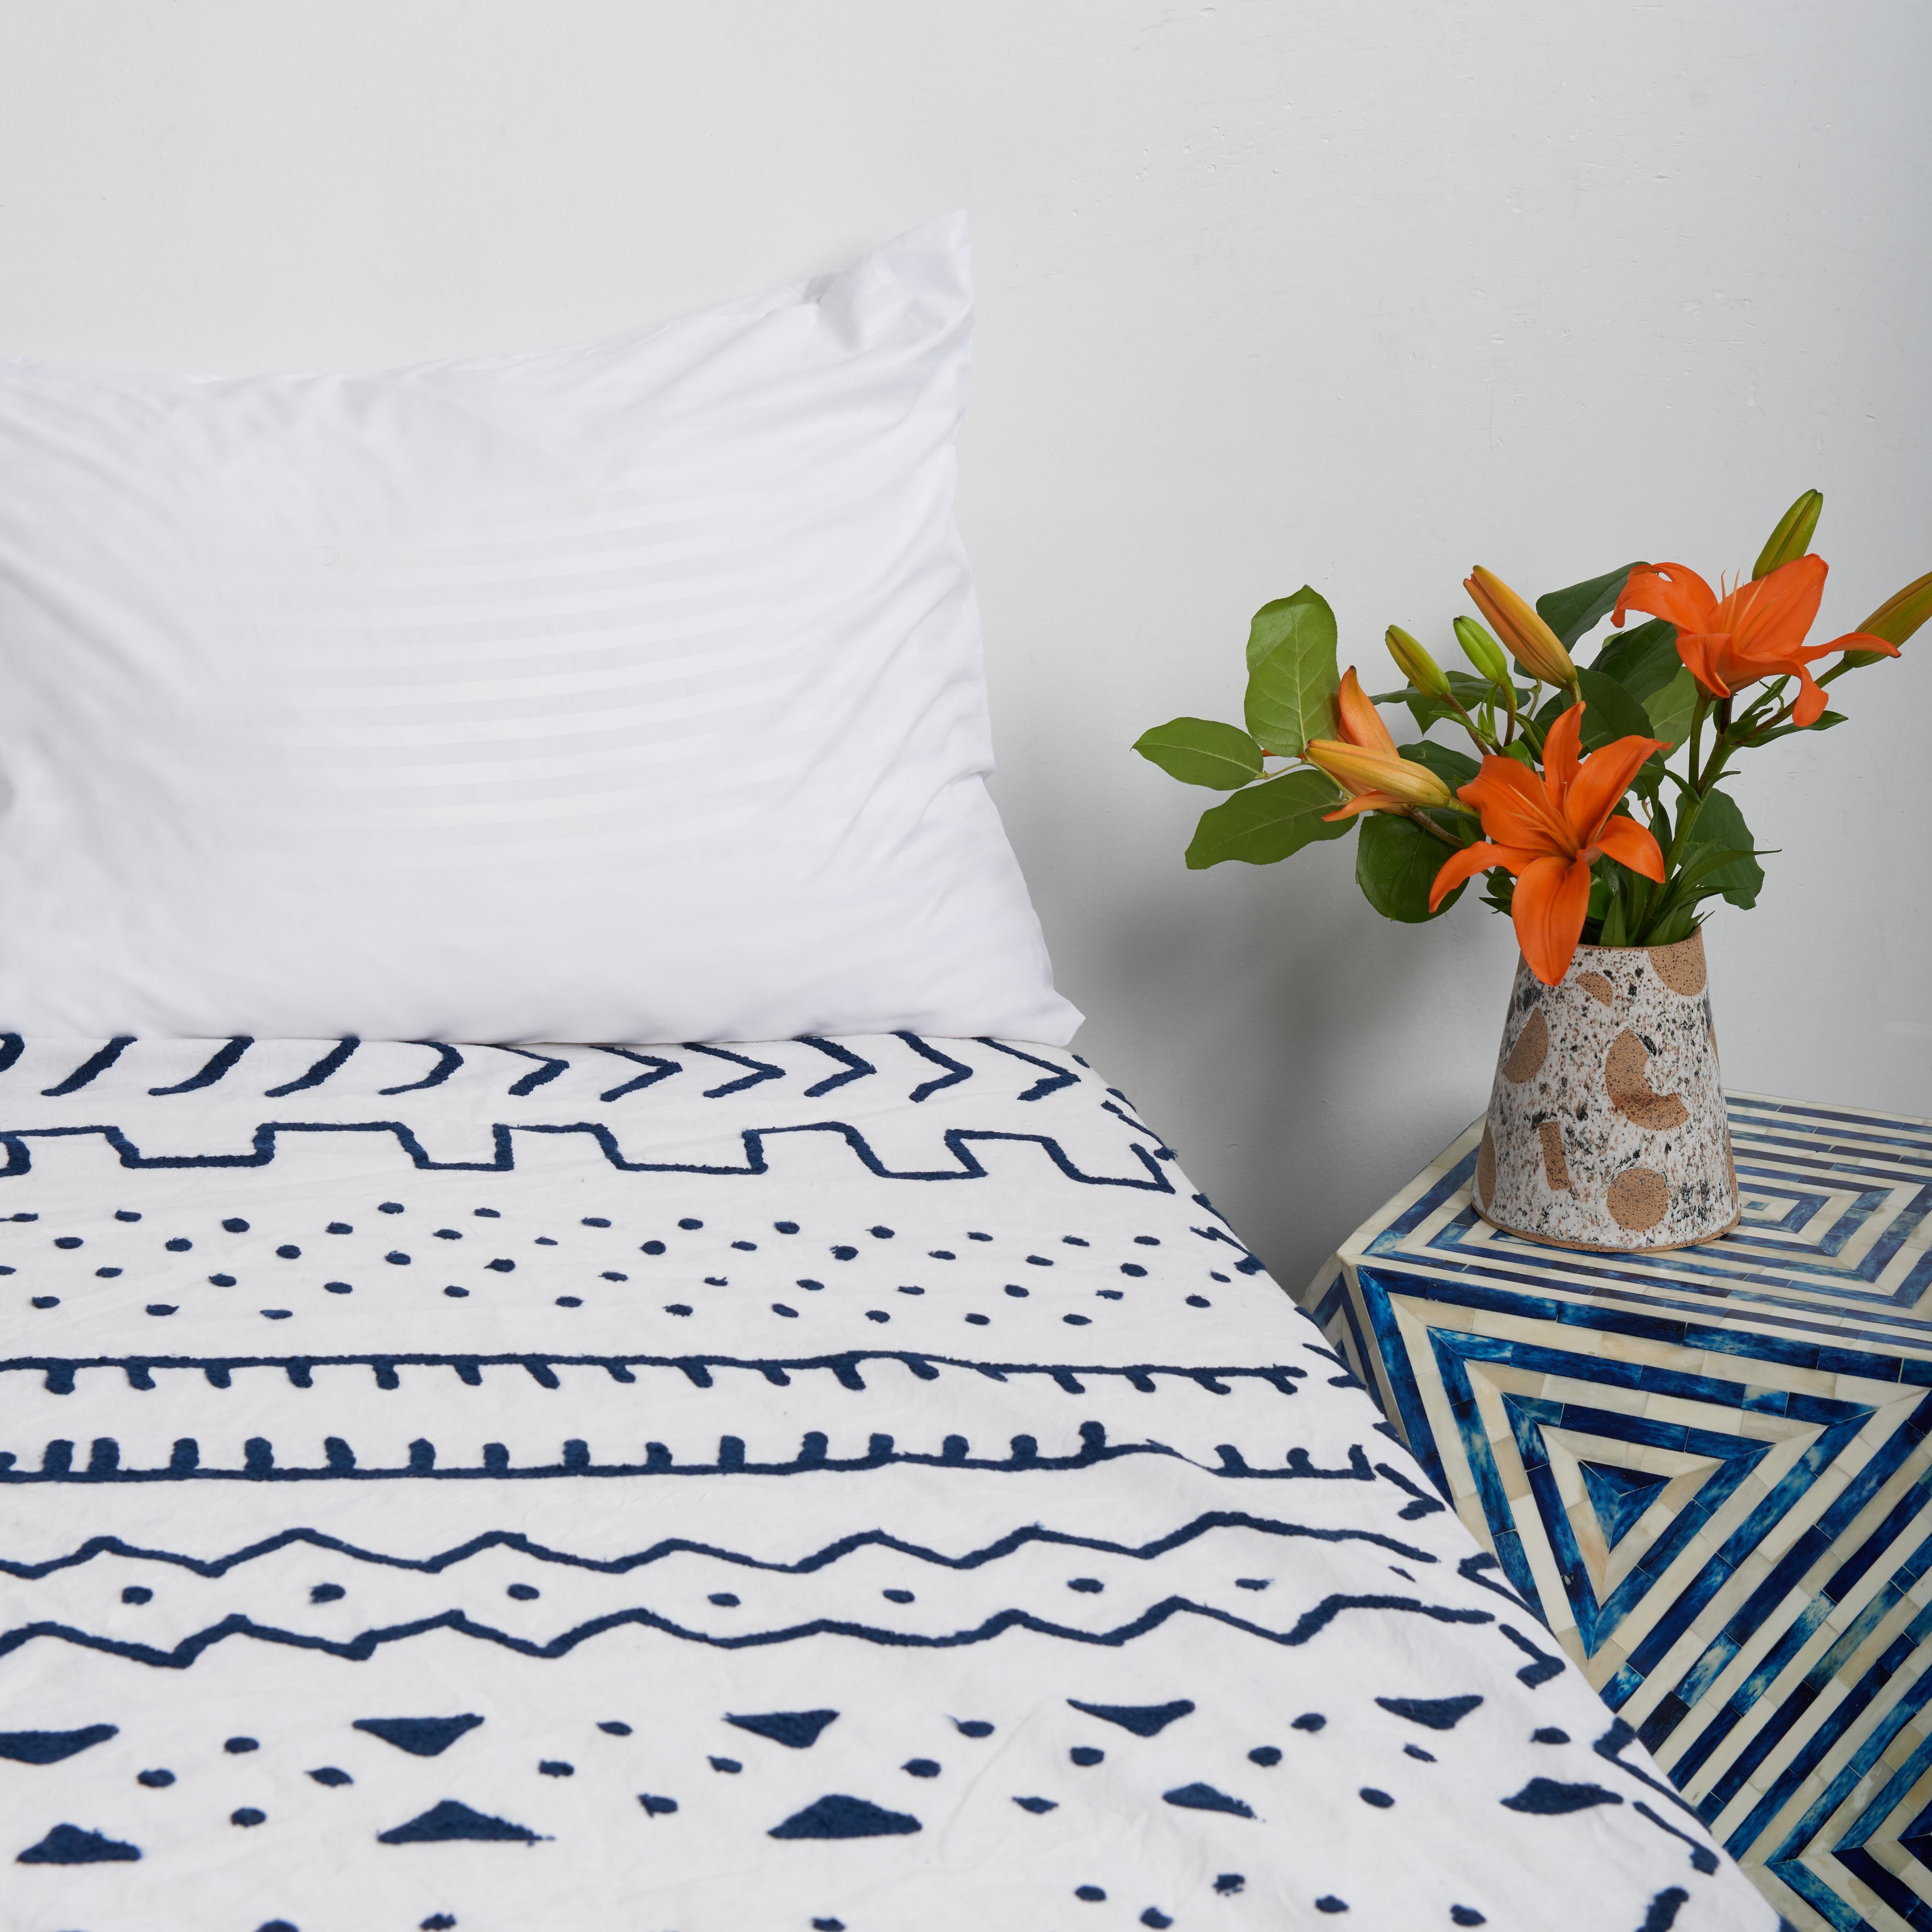 Tribal Inspired White and Navy Embroidered Coverlet Bedspread / Wall Hanging (Stammeskunst) im Angebot